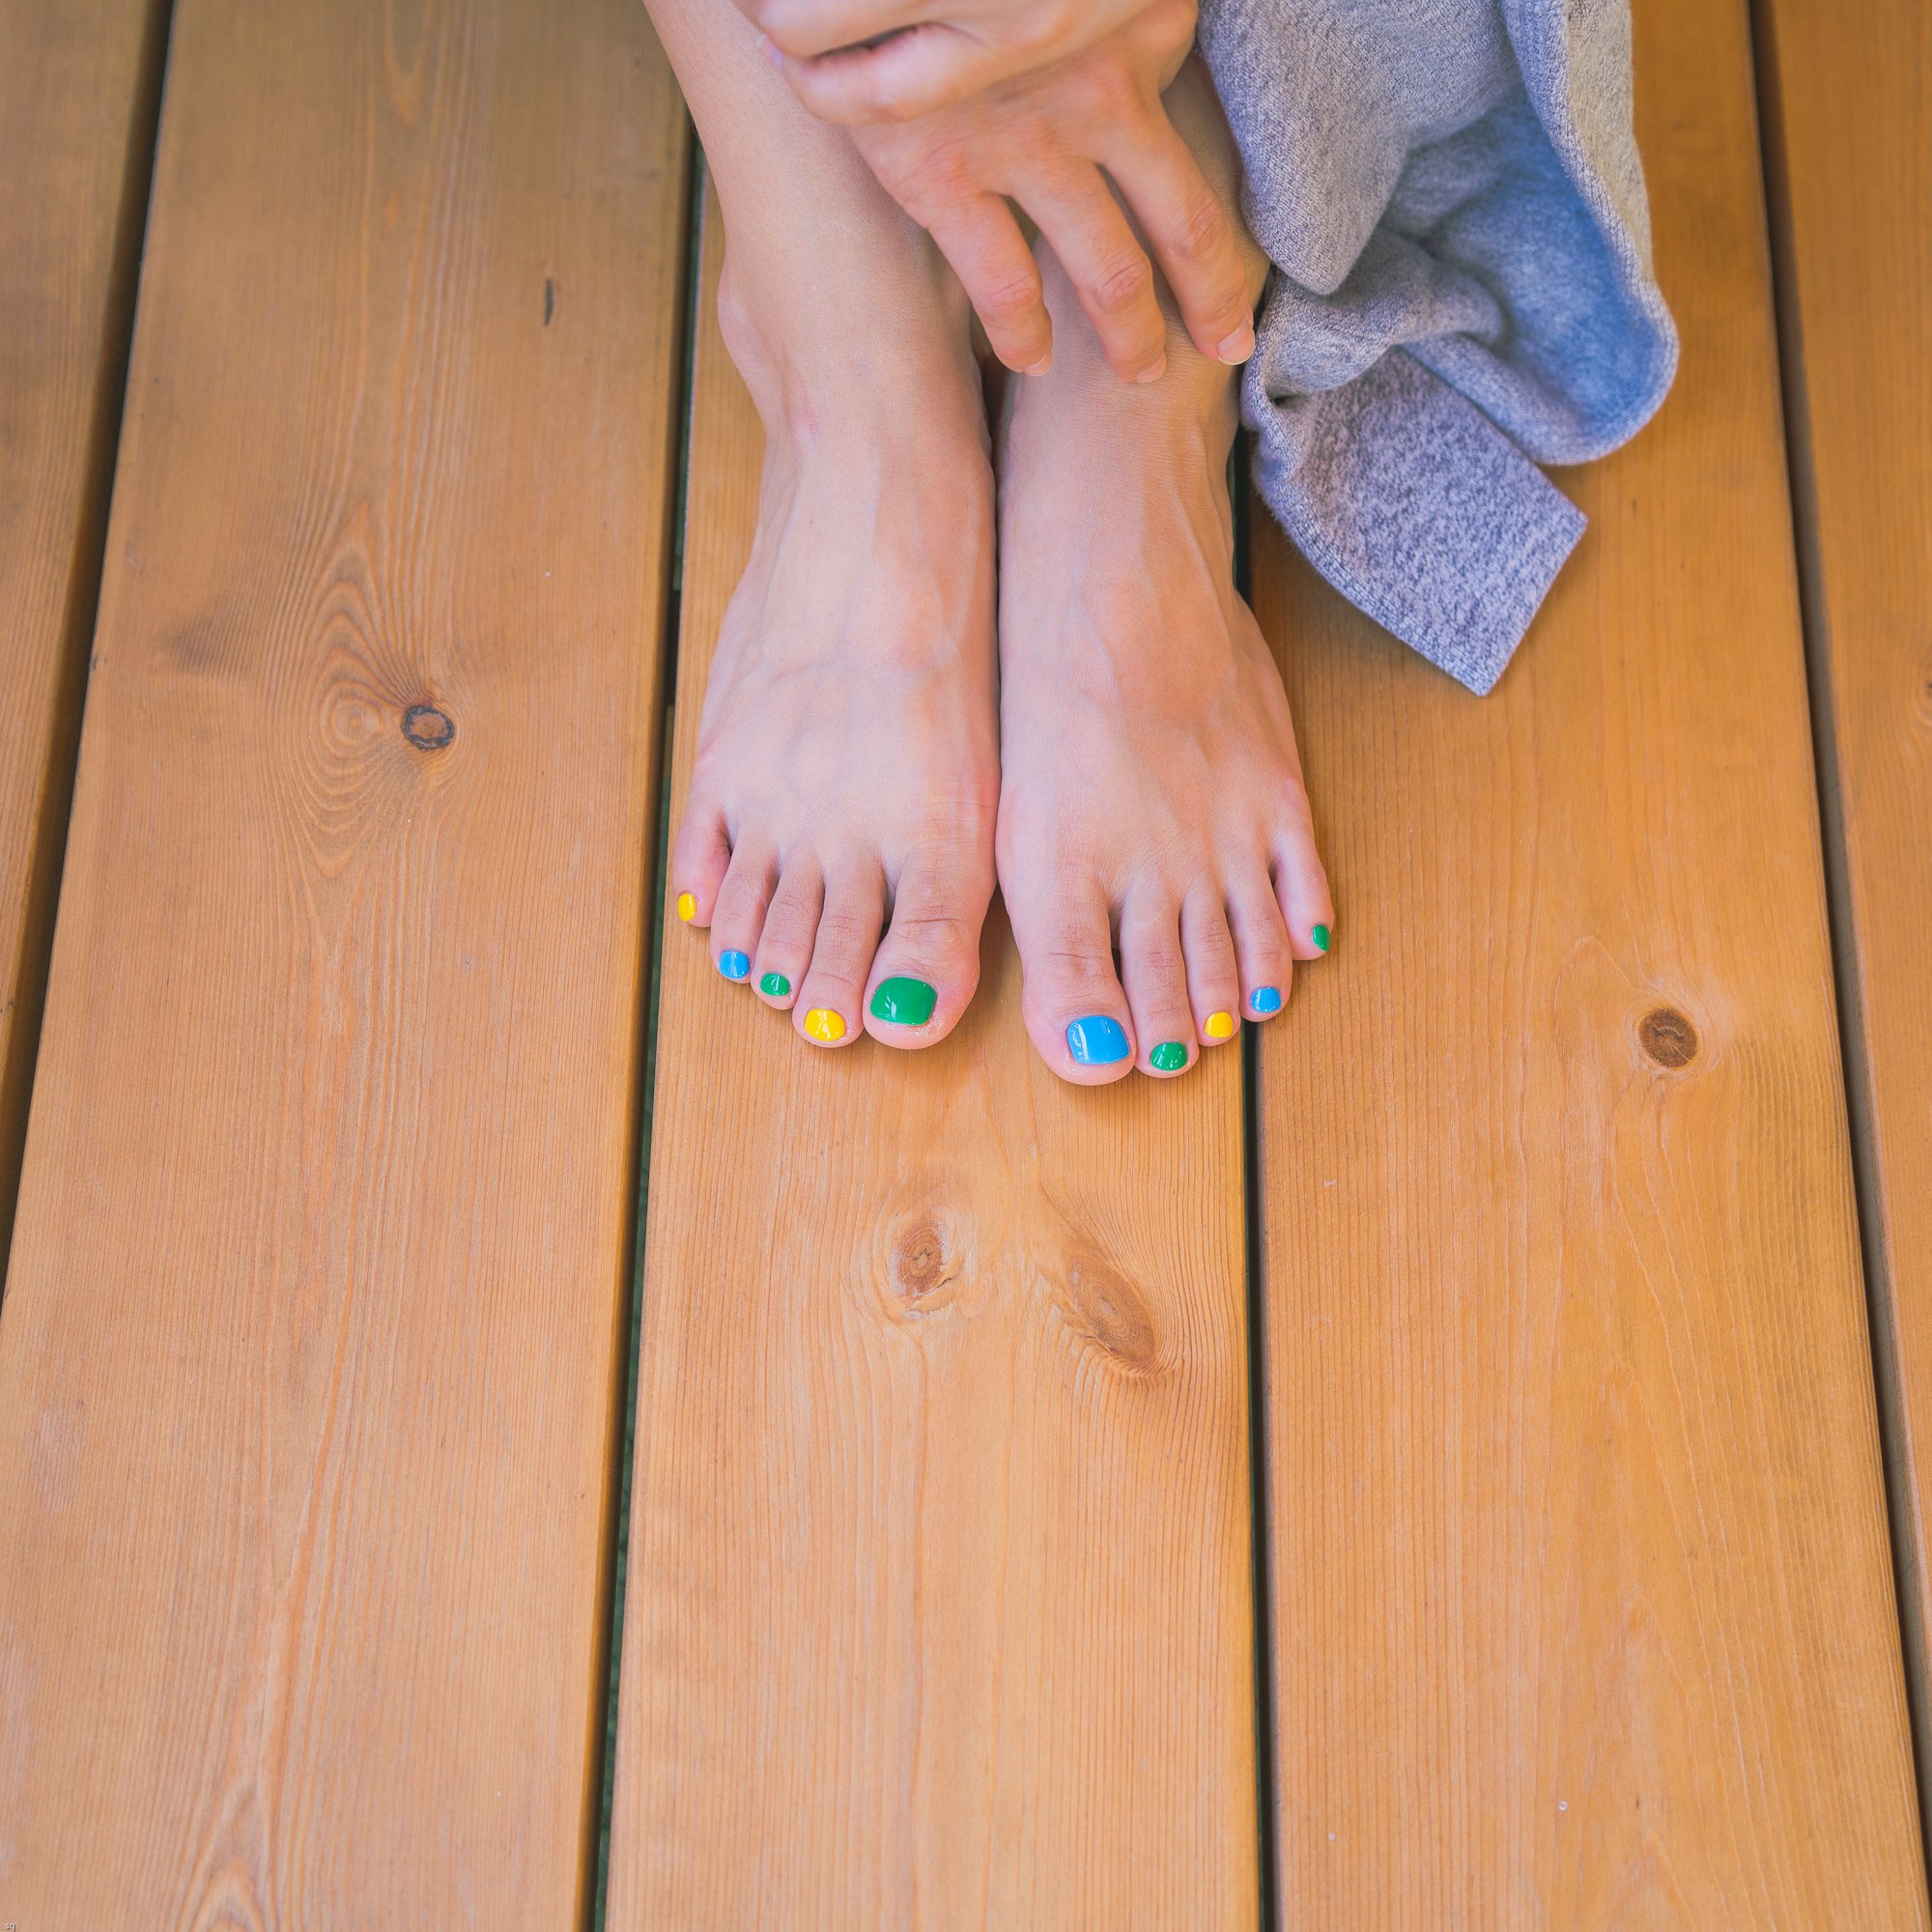 Toes in Transition: How Long After Toenail Removal Can I Wear Shoes?